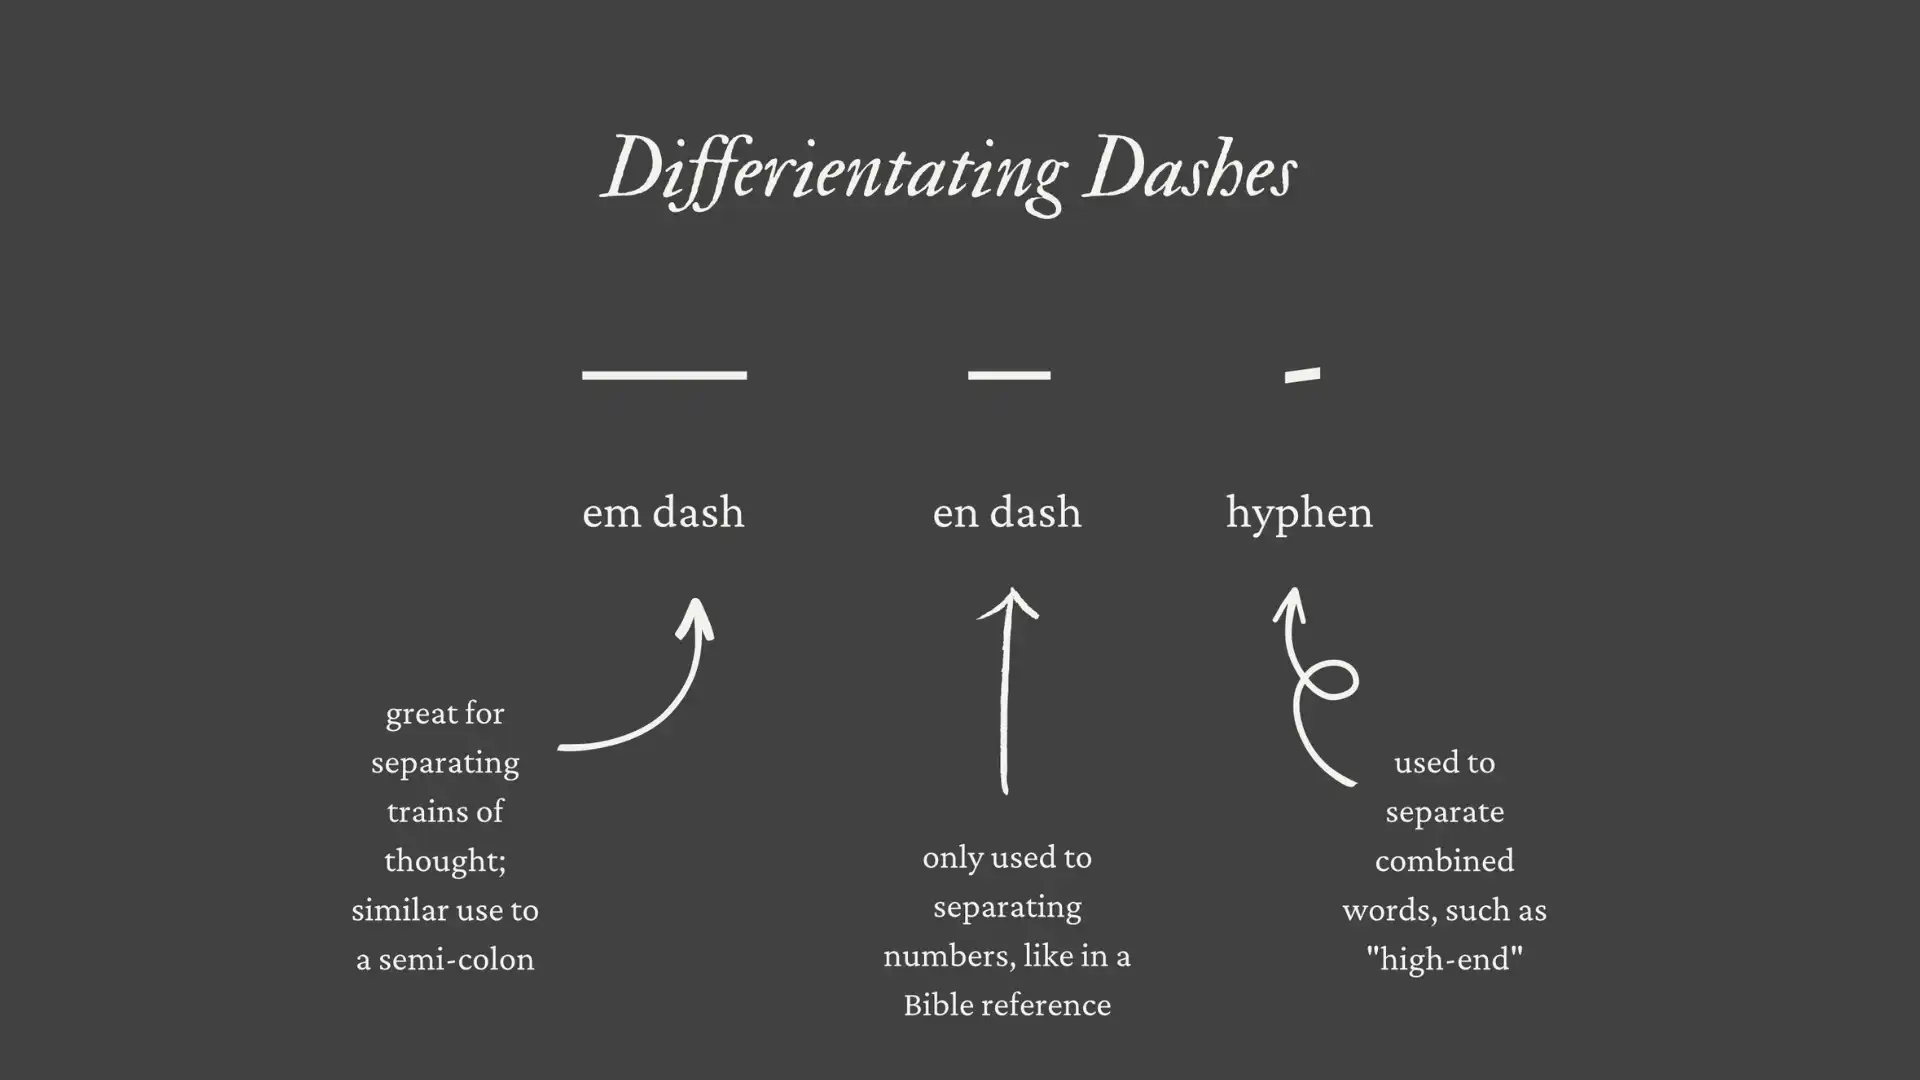 when should you use a dash in your writing